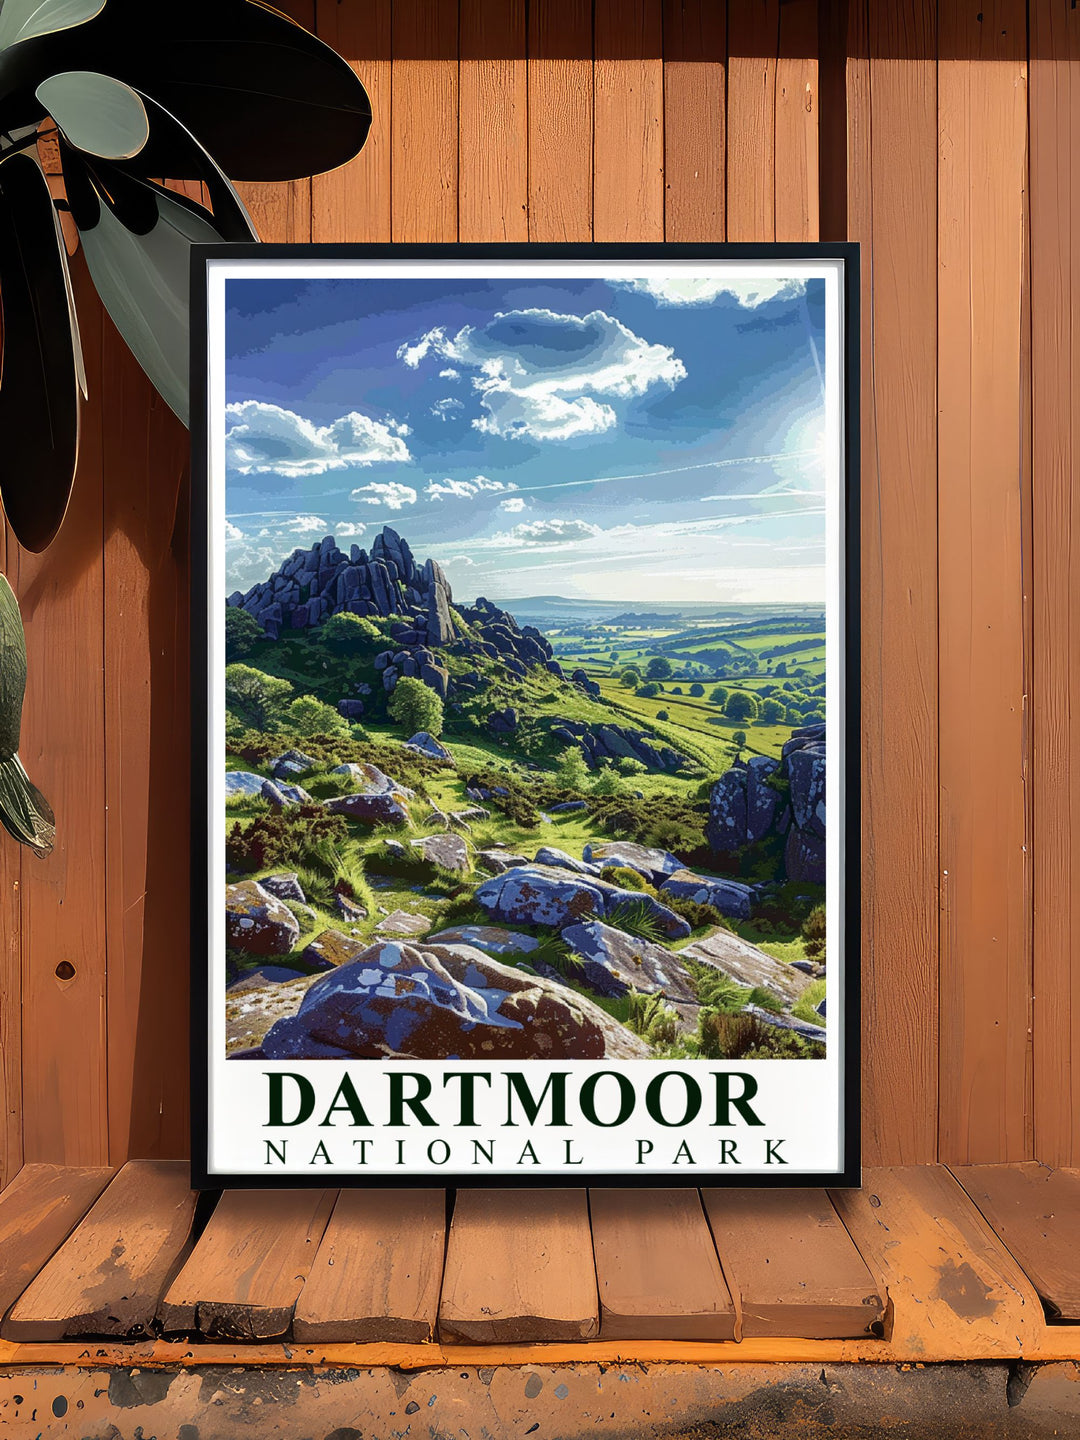 Modern wall decor showcasing the majestic beauty of Dartmoor National Park, with its iconic tors and scenic views, perfect for bringing a sense of tranquility and nature into your home.